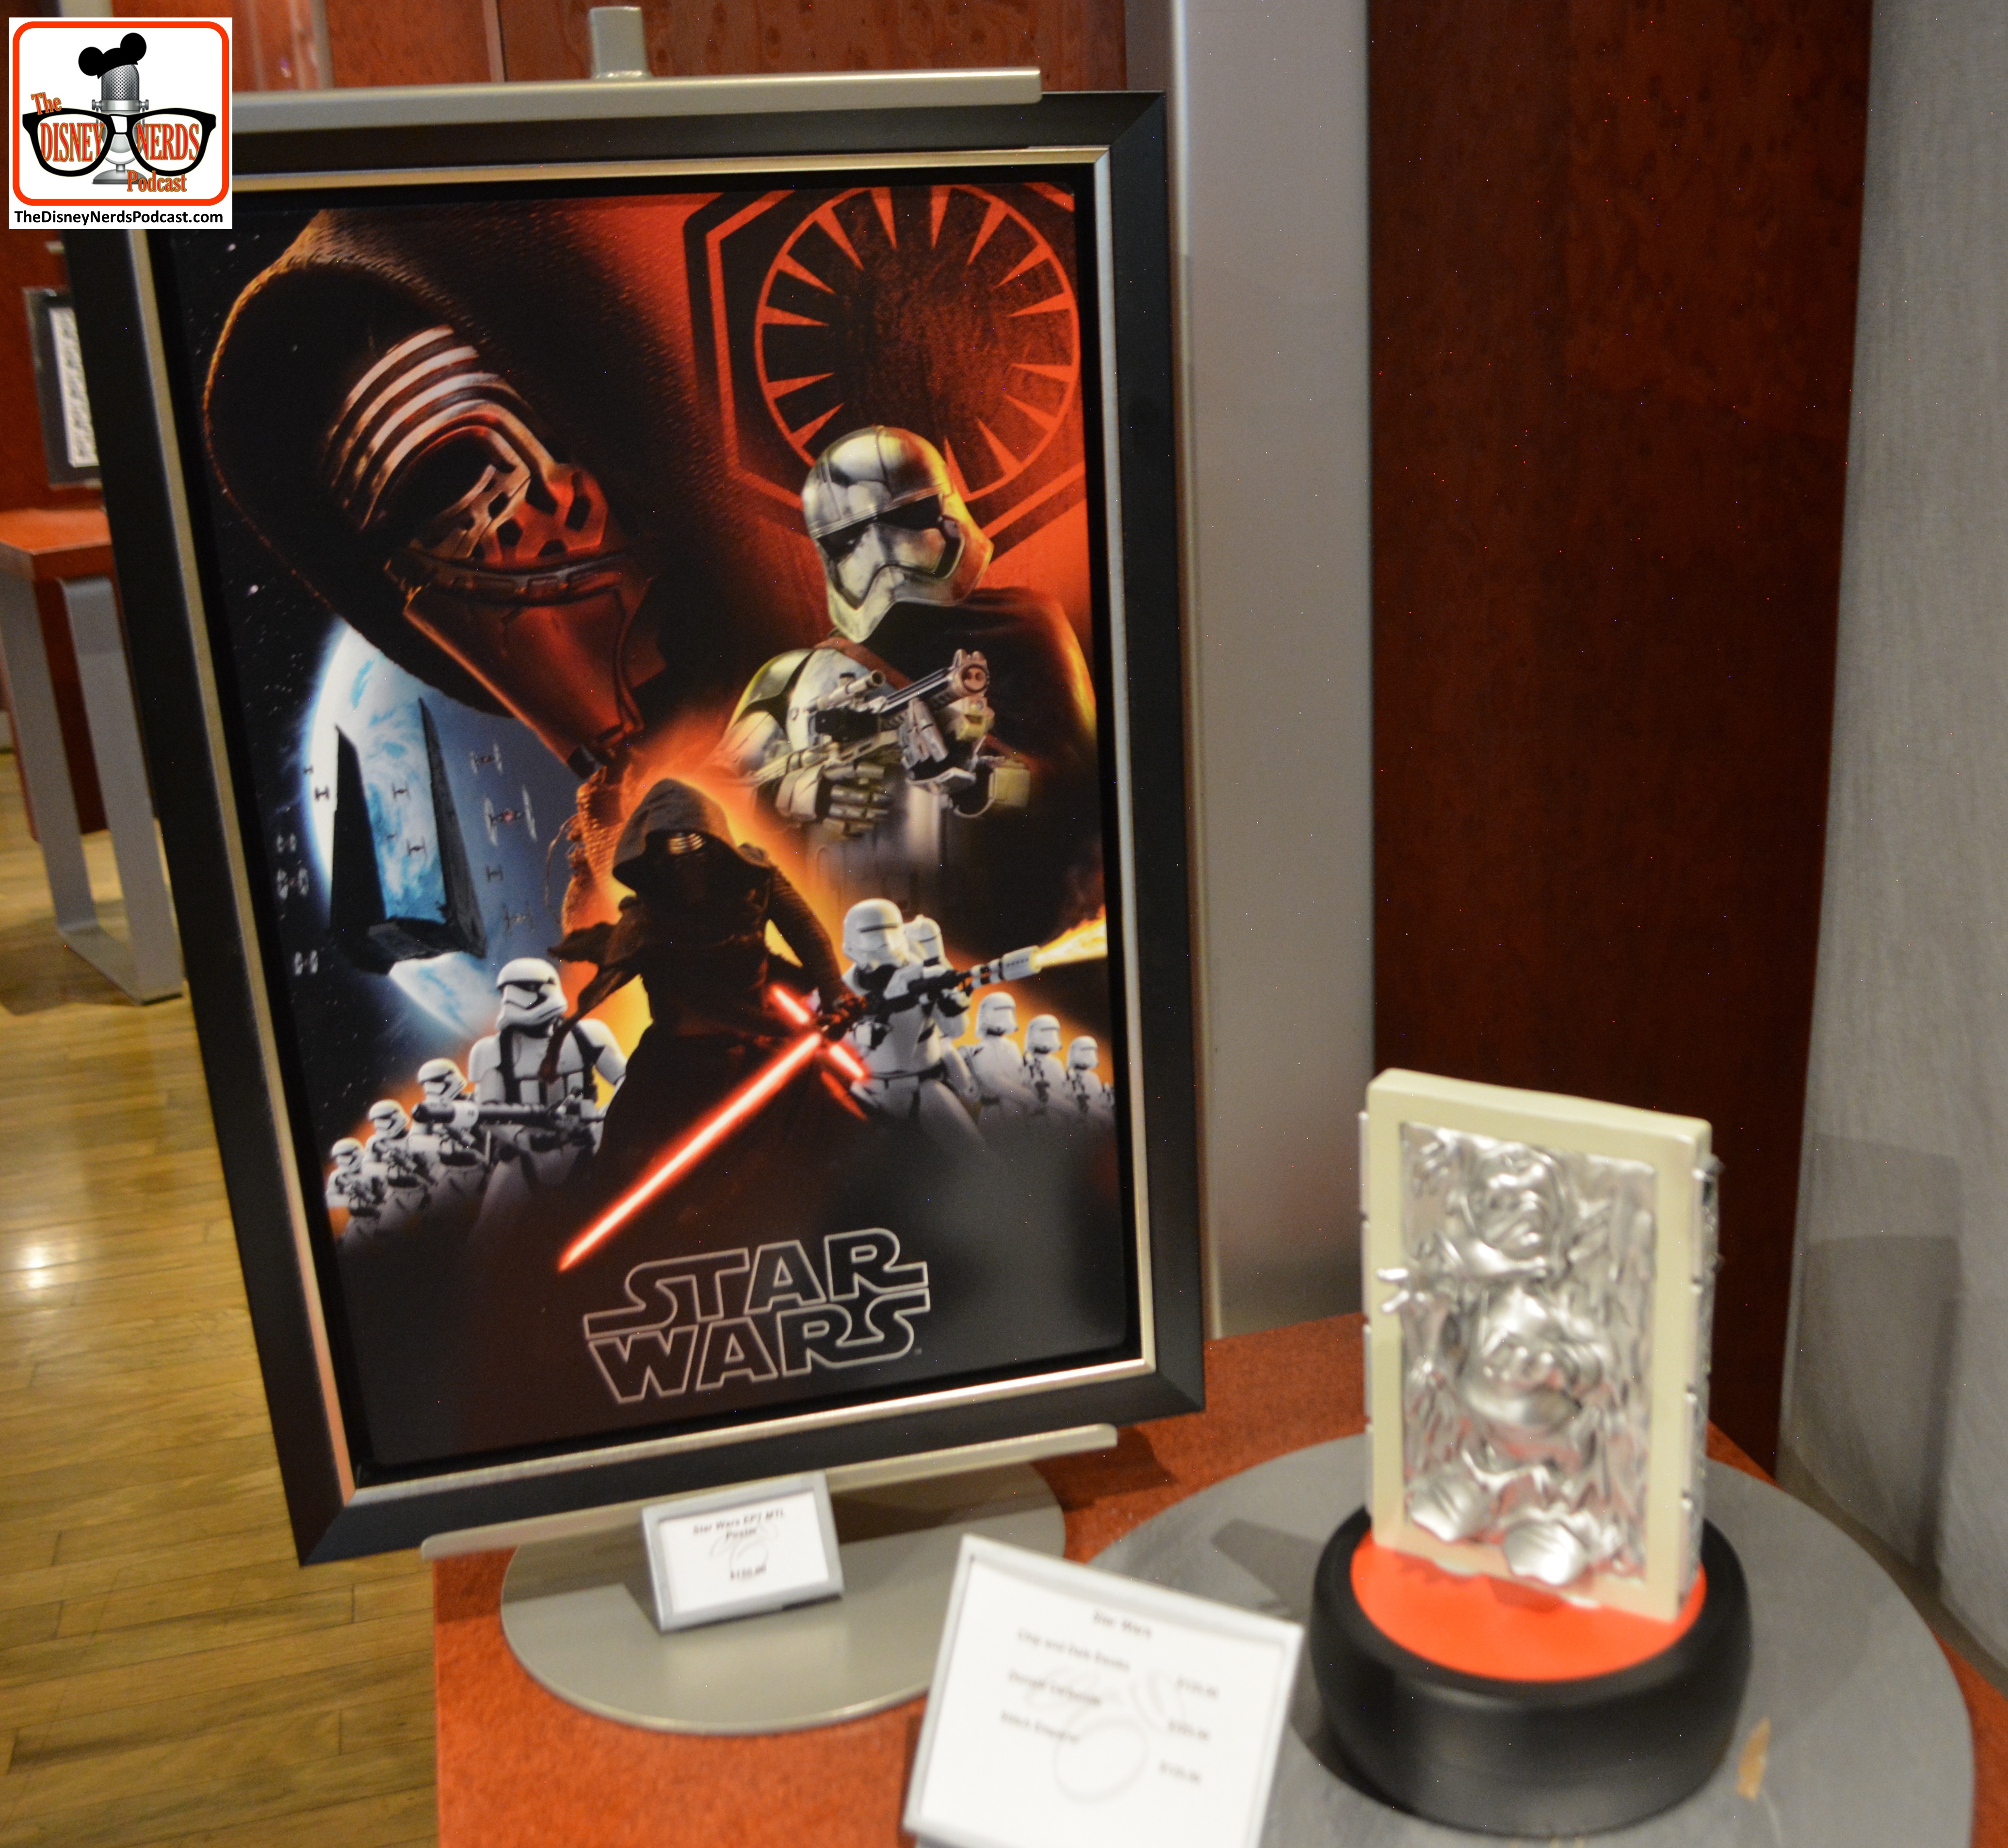 Star Wars at Epcots Art of Animation - Yes - Star Wars Merchandise is Everywhere